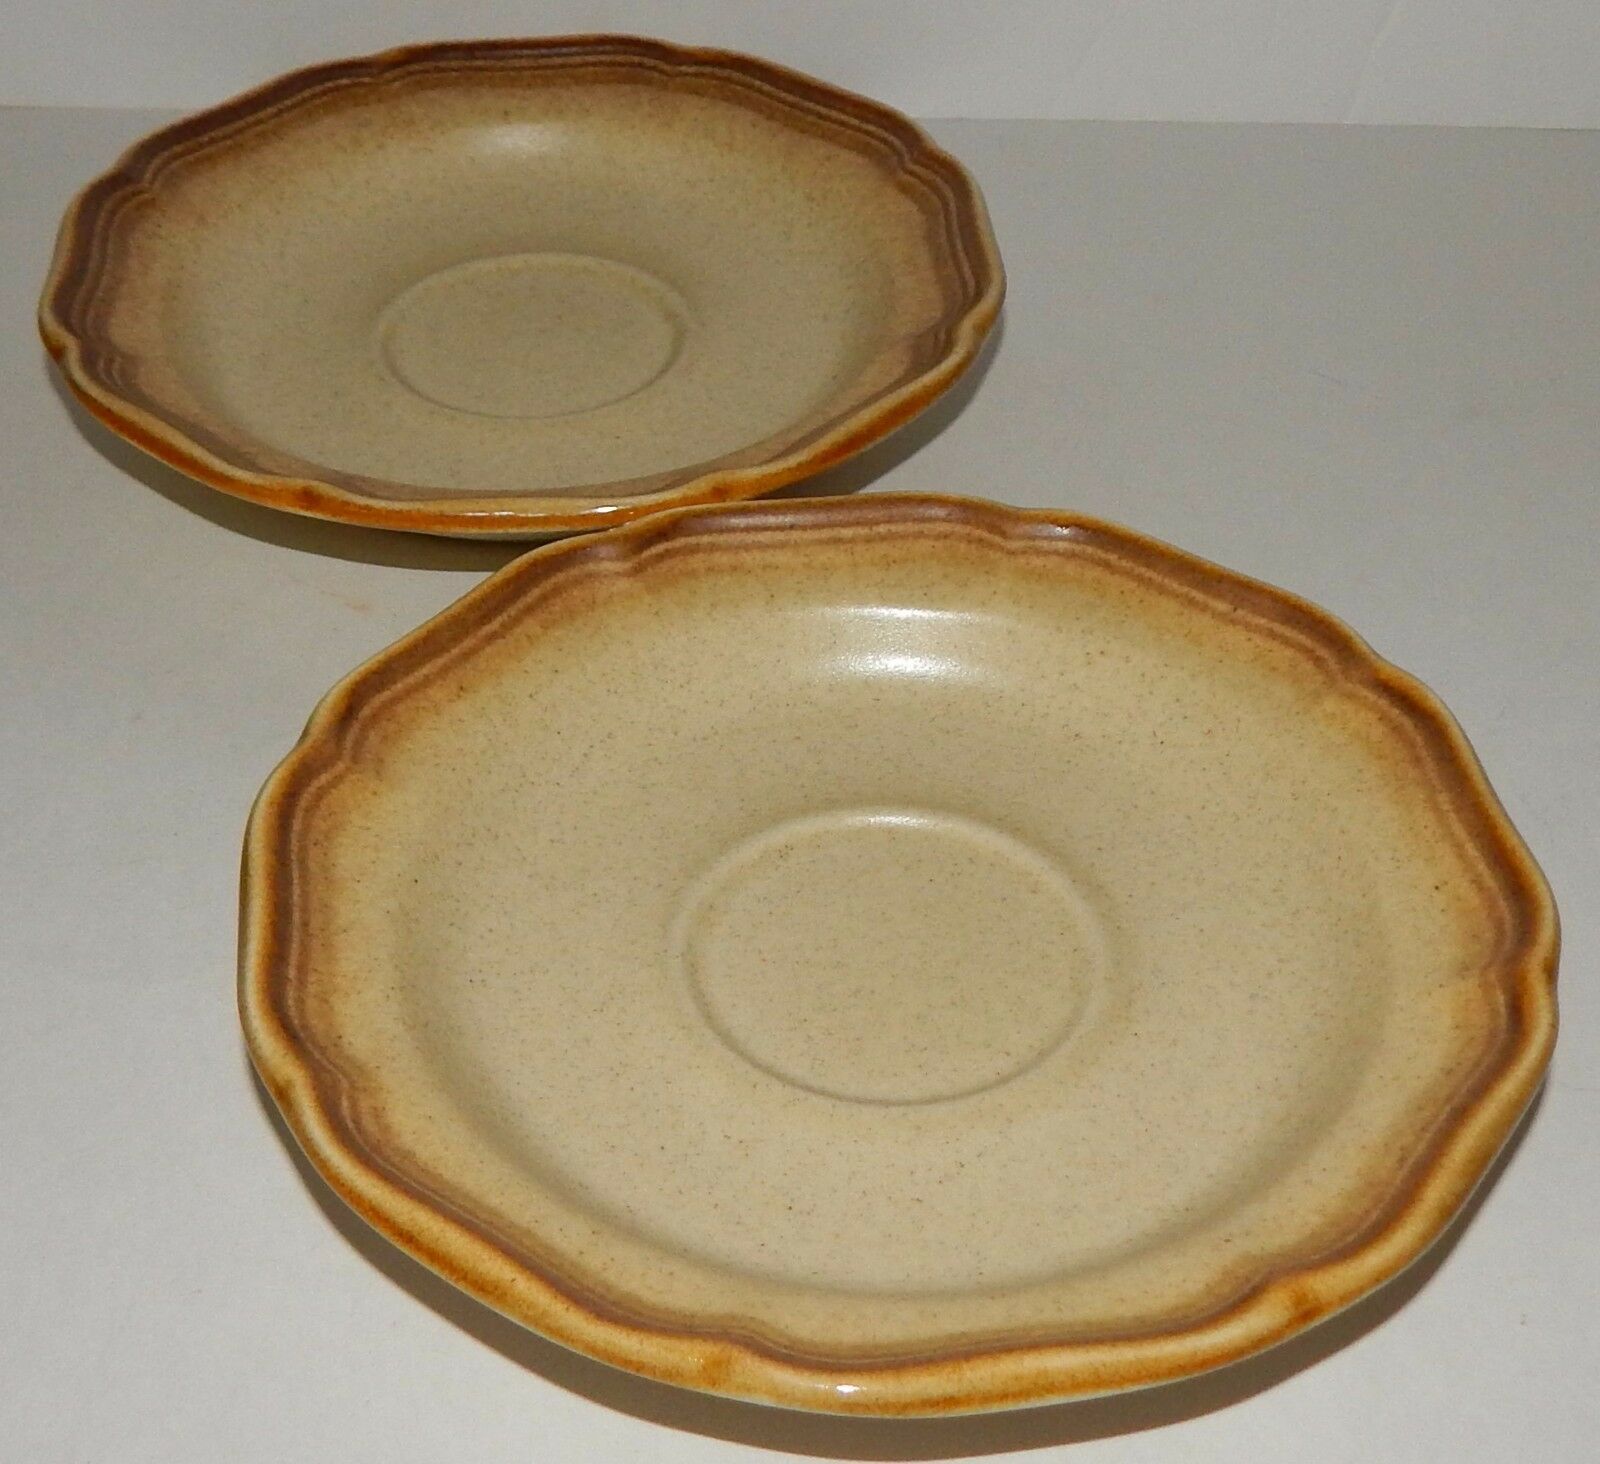 Primary image for 2 Mikasa Whole Wheat E8000 Saucers Brown Tan Scalloped Edge Japan 